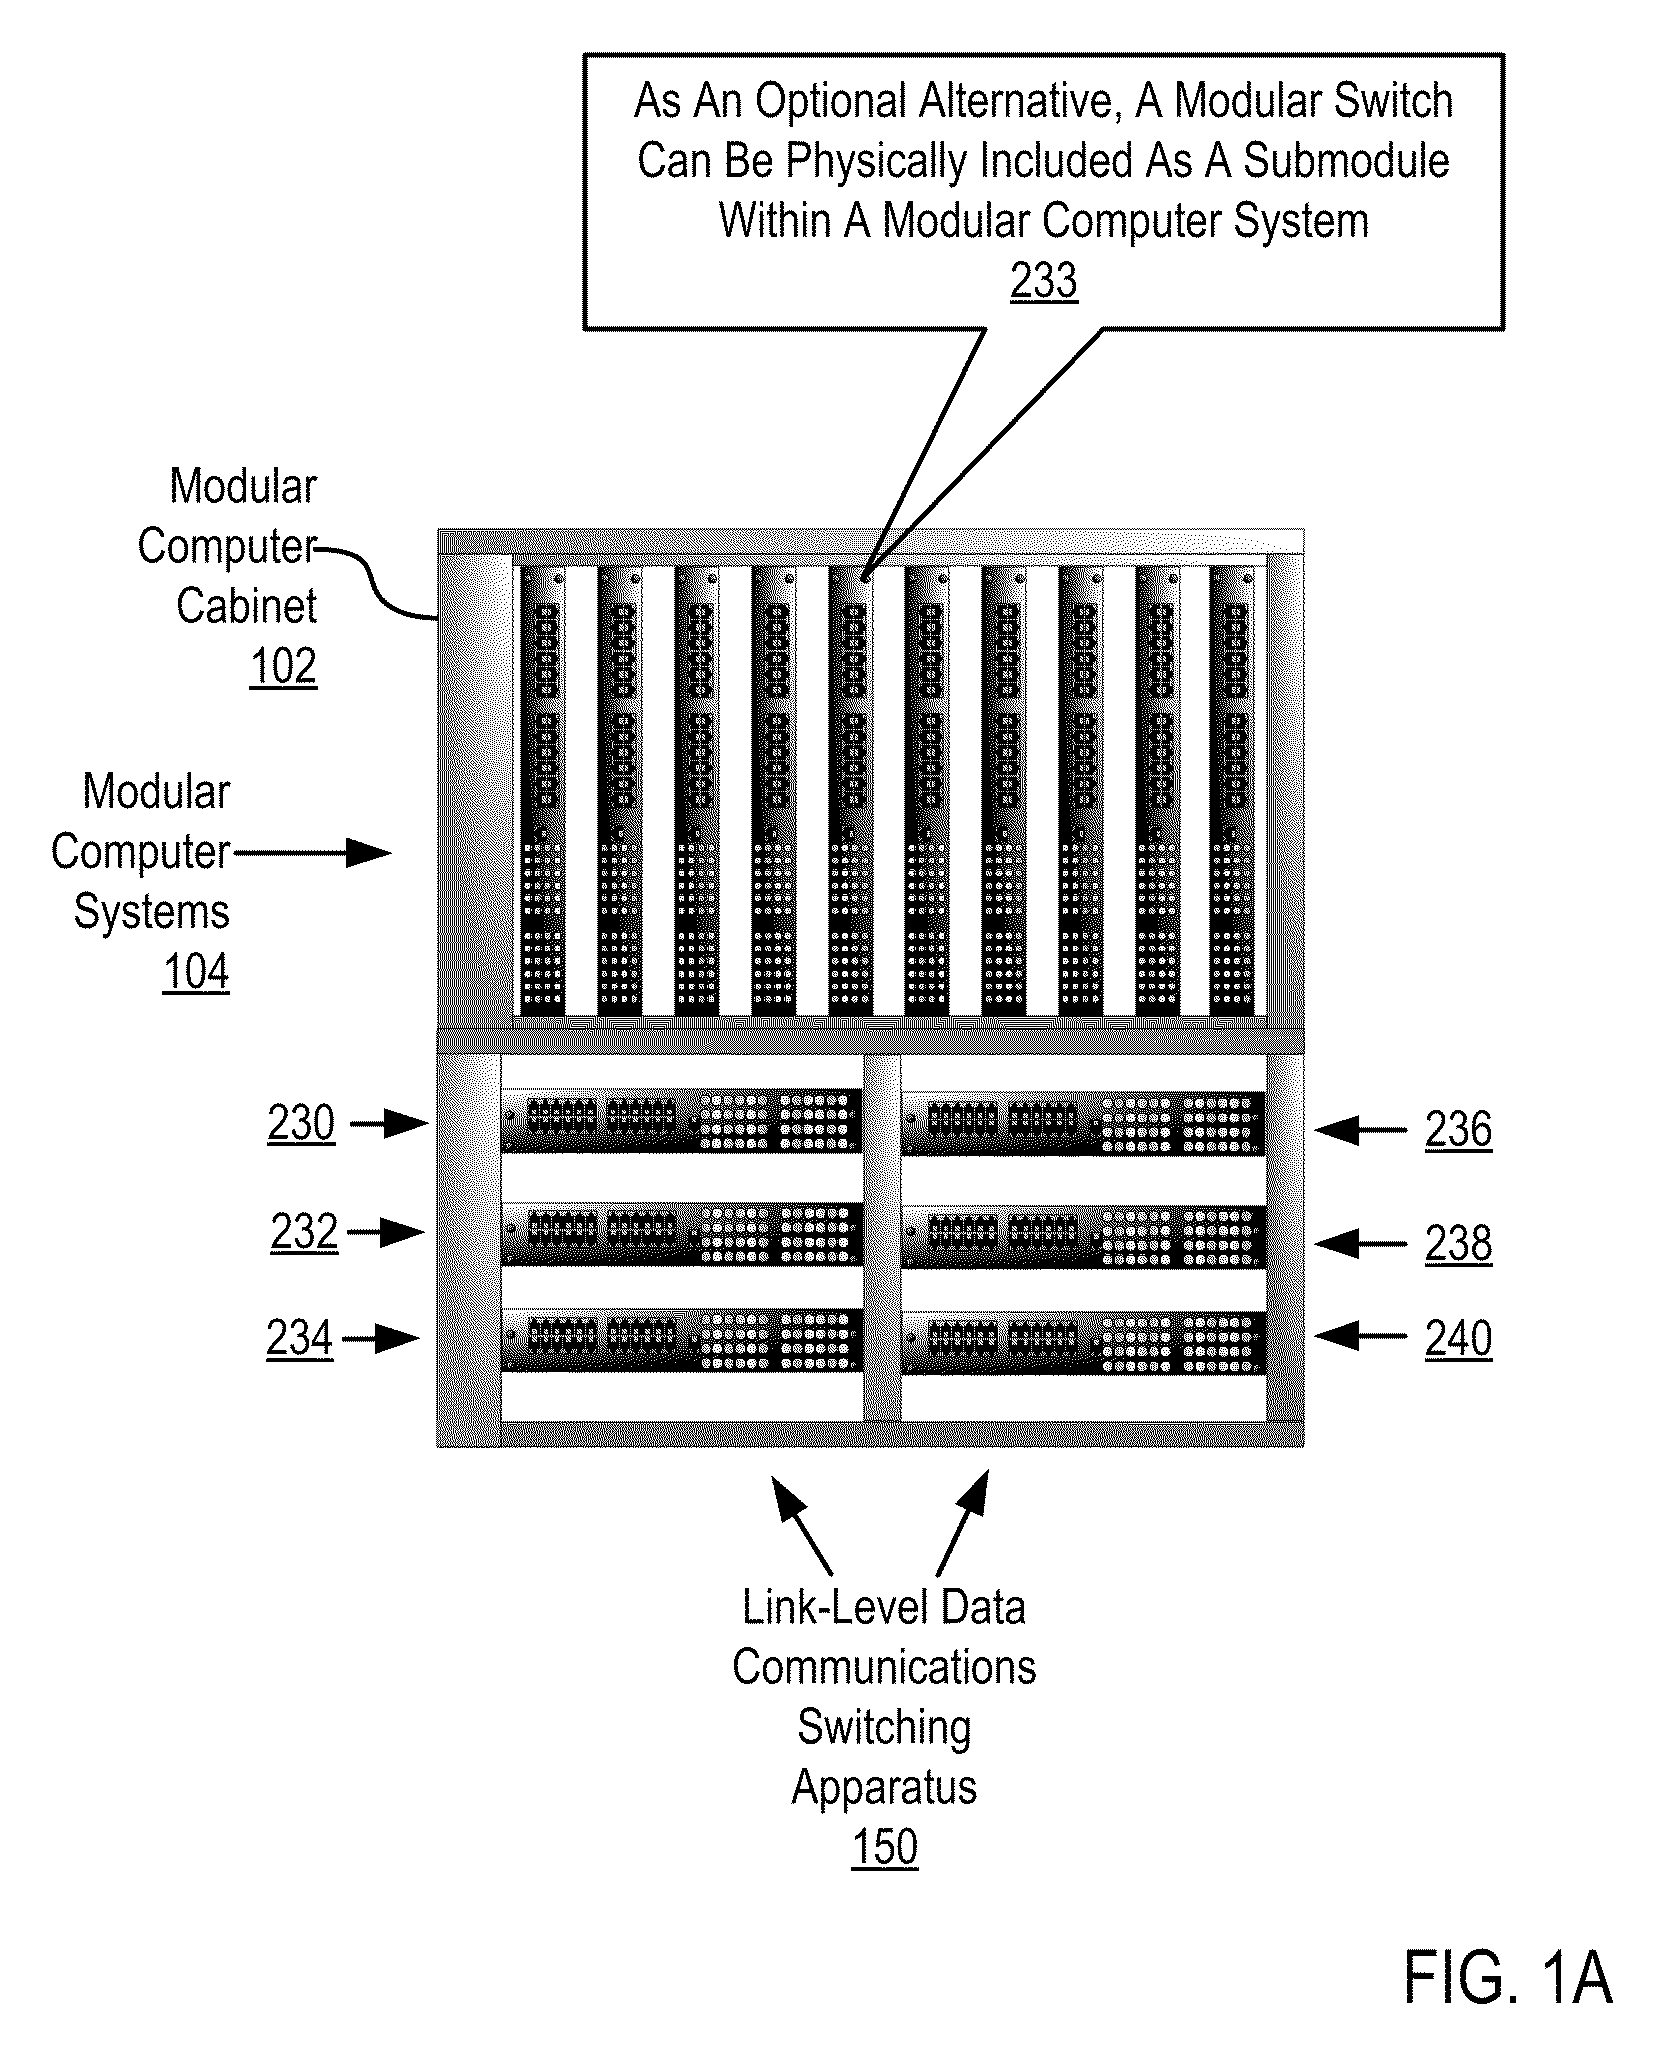 Two-layer switch apparatus to avoid first layer inter-switch link data traffic in steering packets through bump-in-the-wire service applications